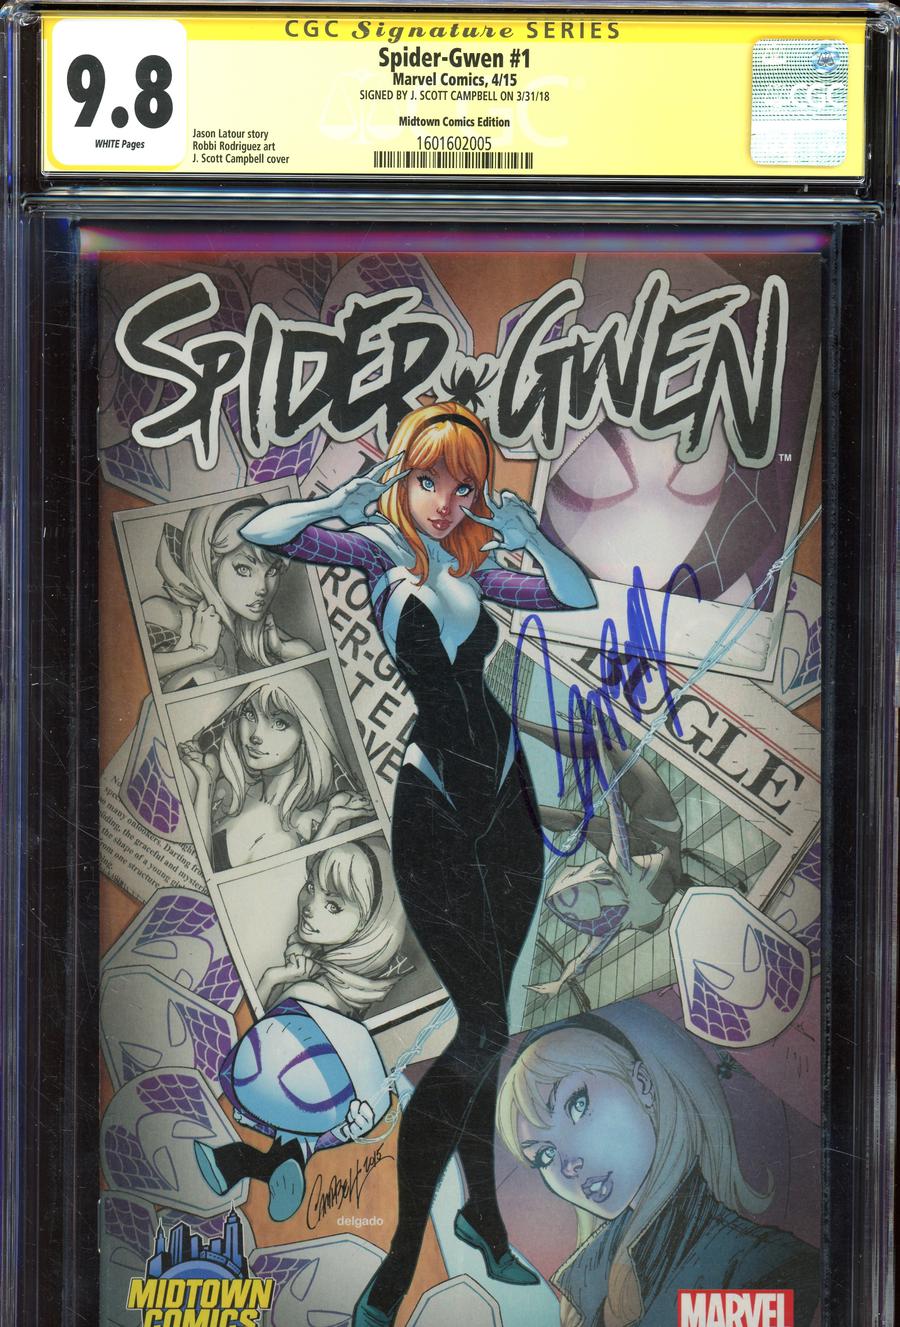 Spider-Gwen #1  Midtown Exclusive J Scott Campbell Color Variant Cover Signed By J Scott Campbell CGC 9.8